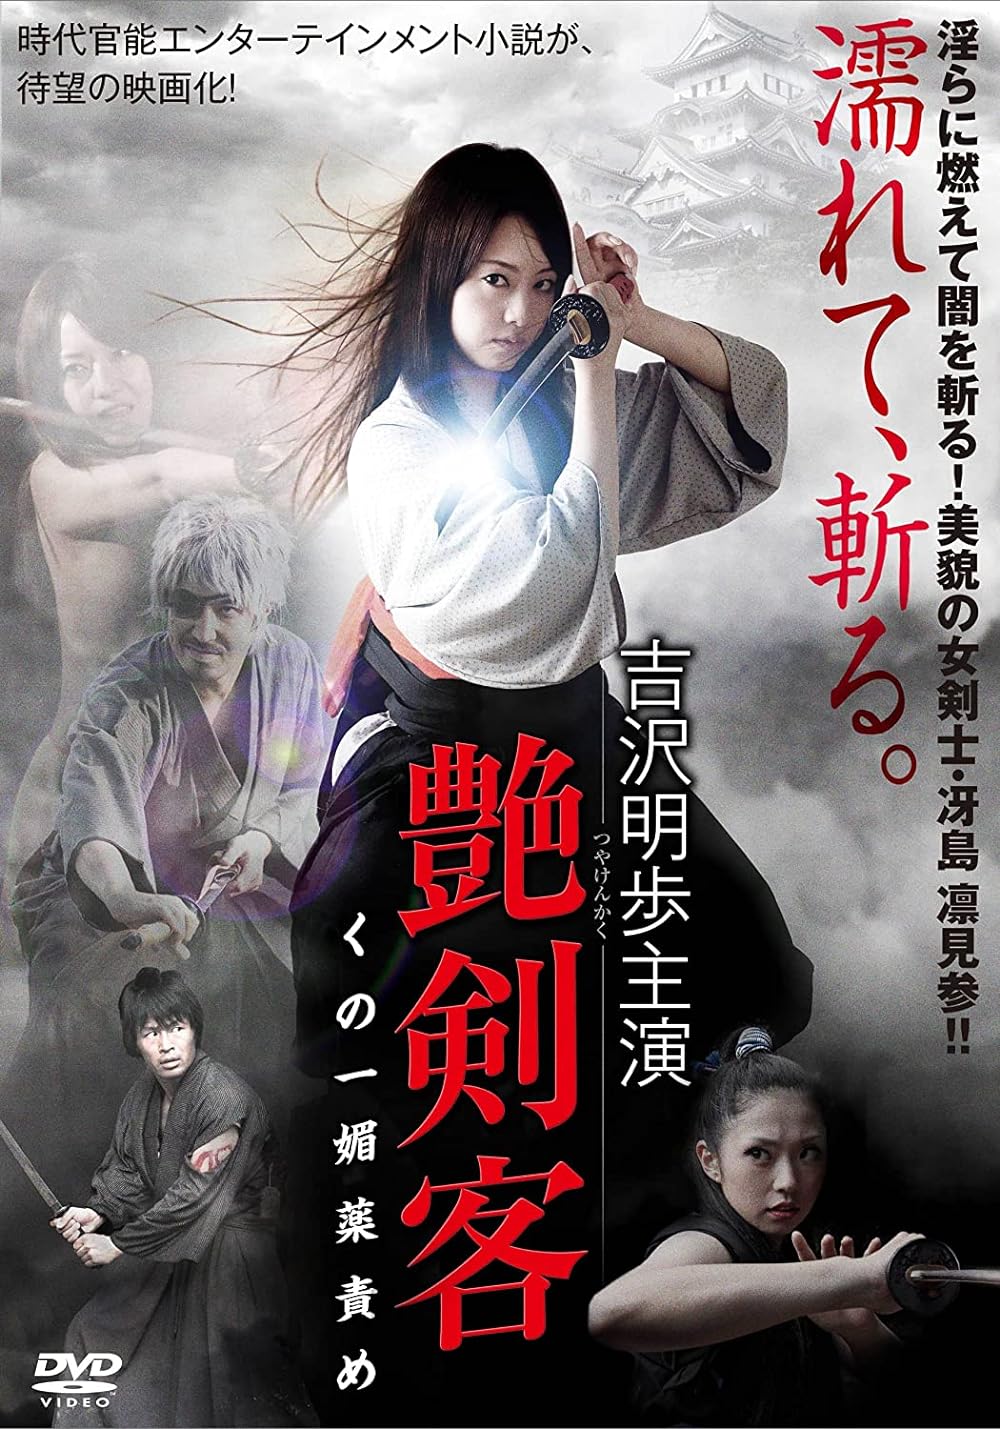 18+The Sultry Assassin The Aphrodisiac Kill 2010 Japanese 480p HDRip 250MB Download